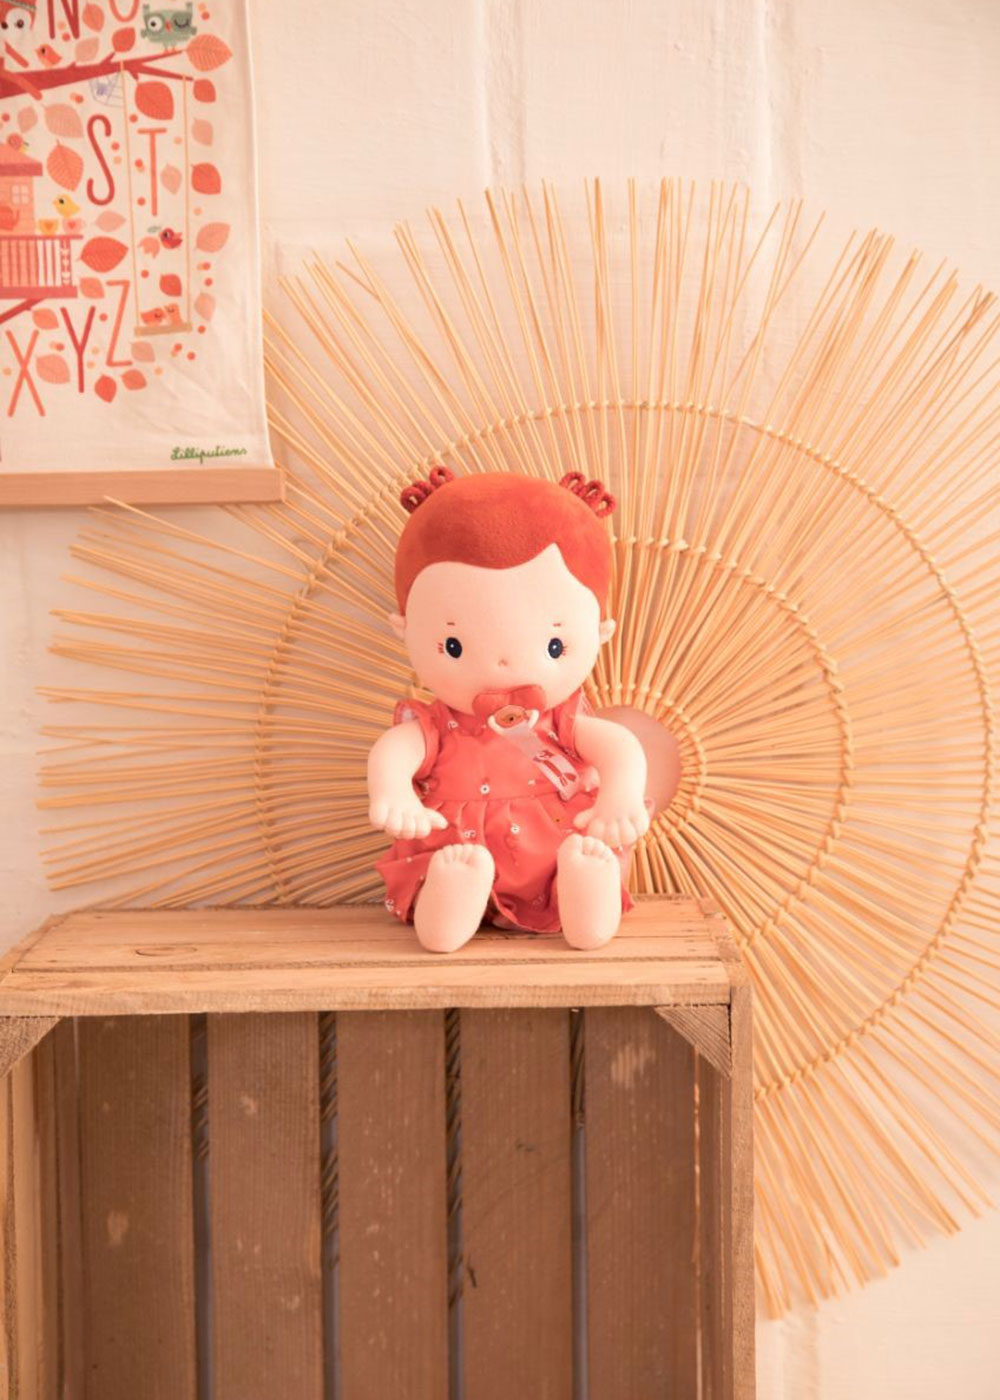 A rose doll sat on top of a wooden crate